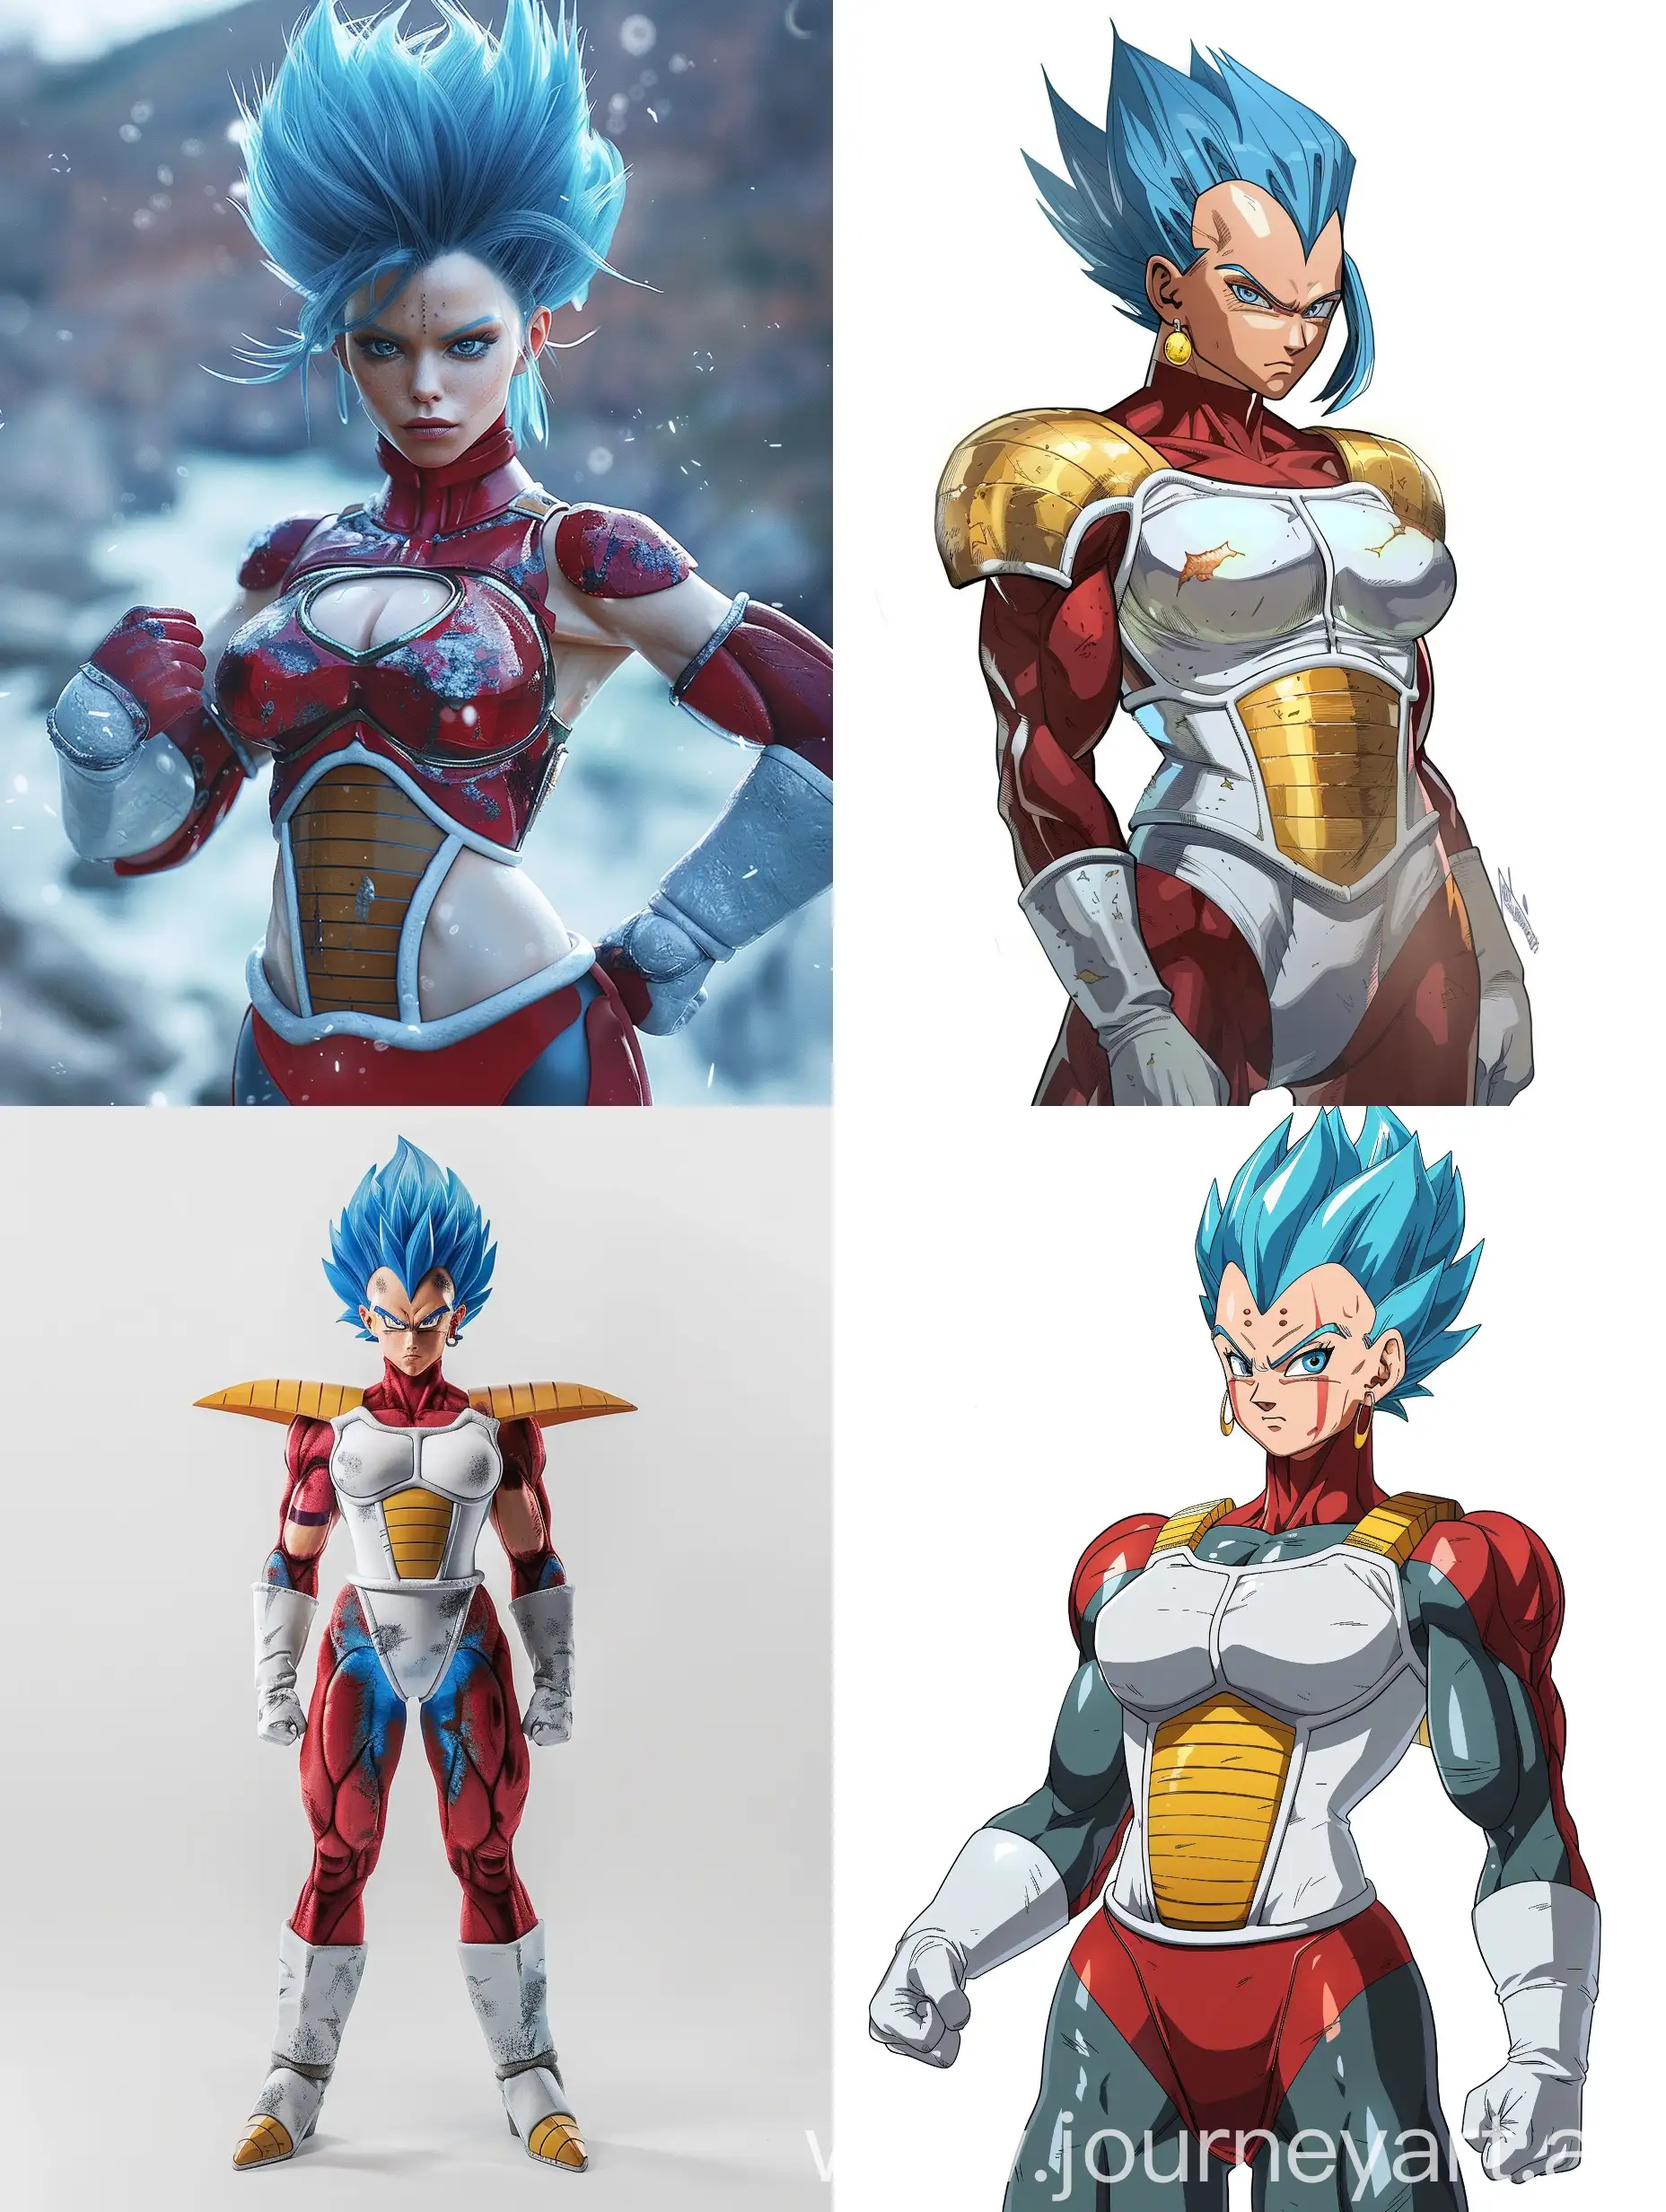 Muscular-Woman-Super-Saiyan-4-in-VegetaStyle-Suit-with-BrolyInspired-Facial-Features